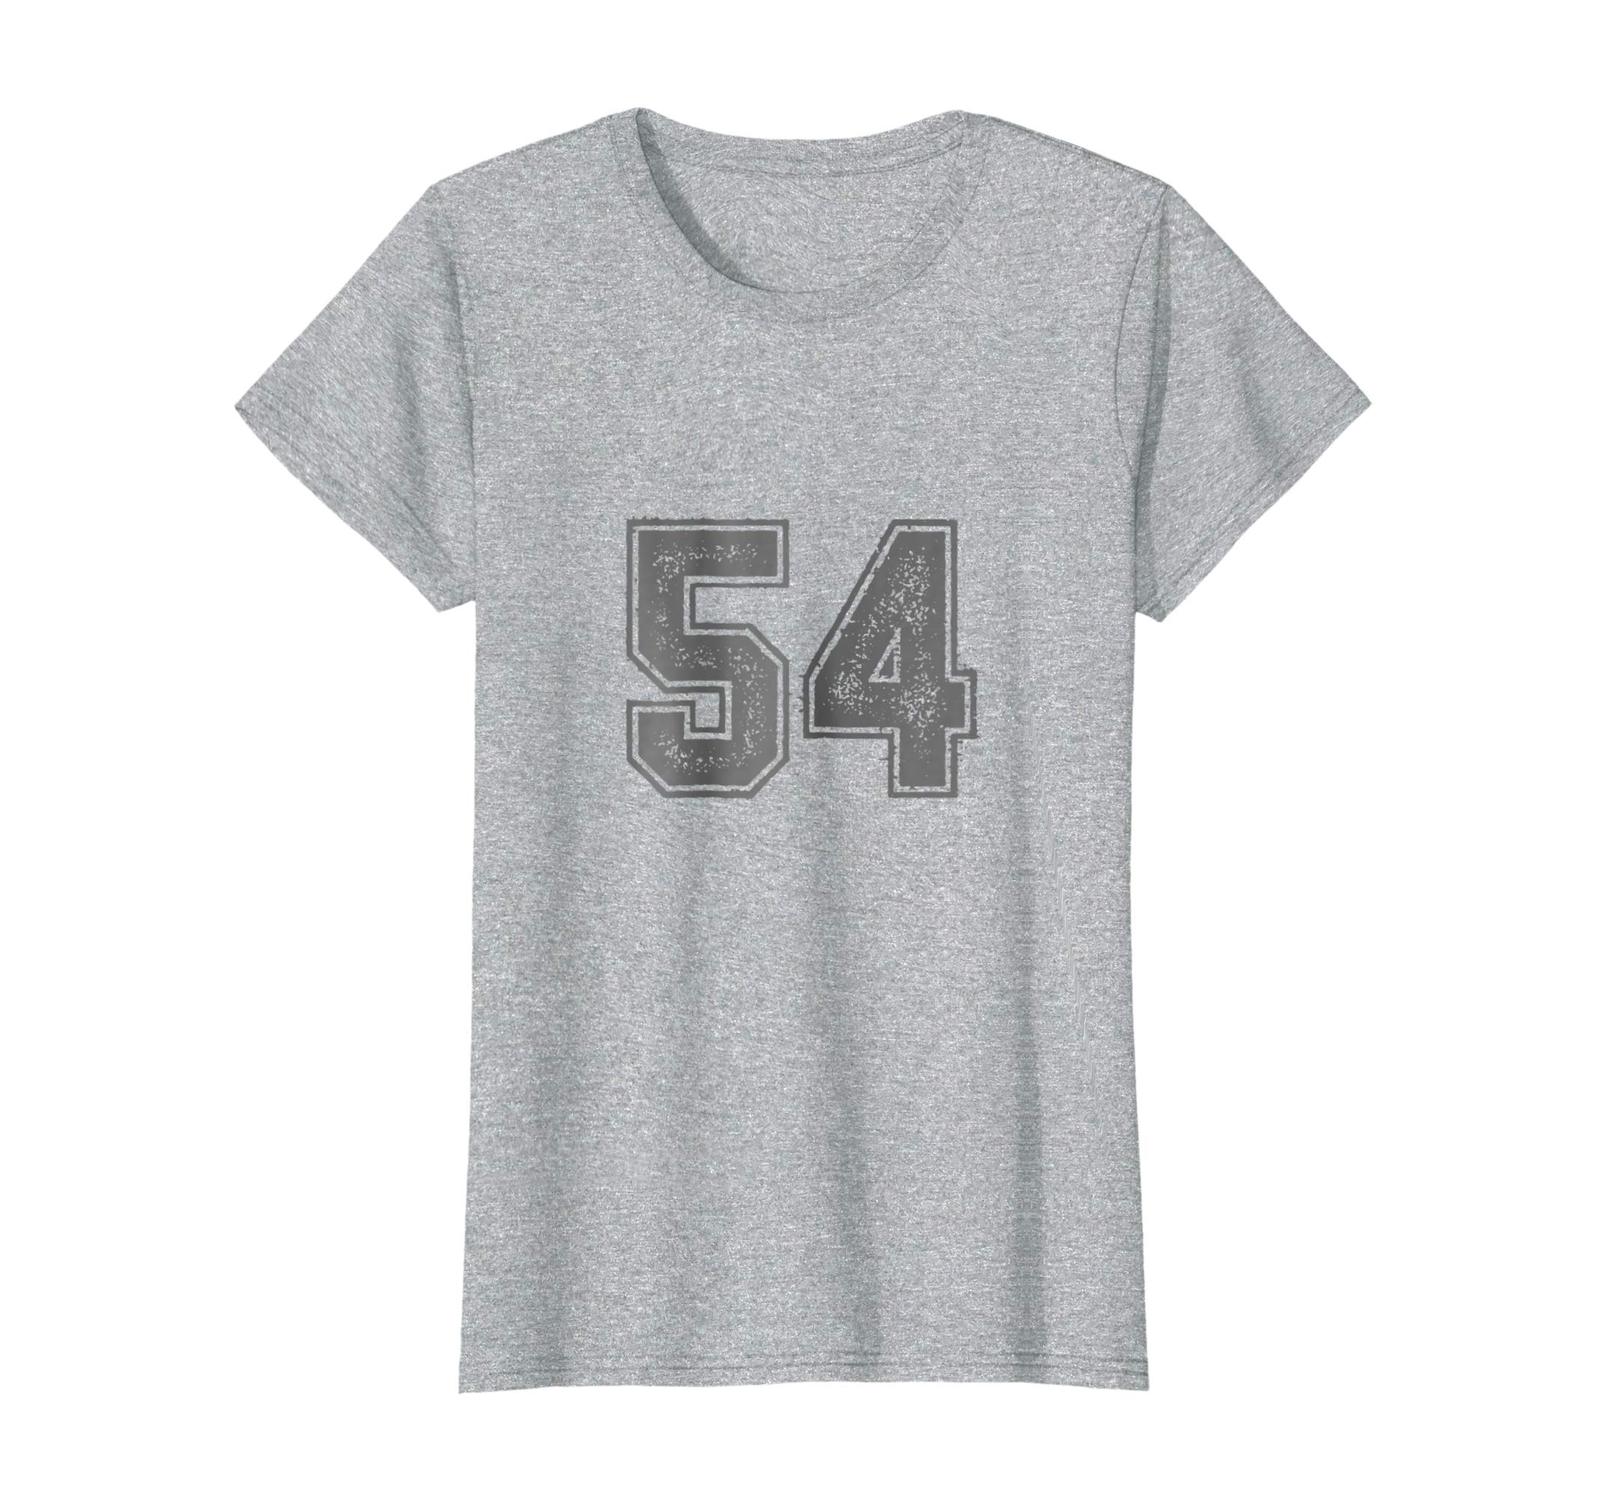 Funny Tshirt - Number 54 T-Shirt Fifty Four Vintage College Tee Design ...